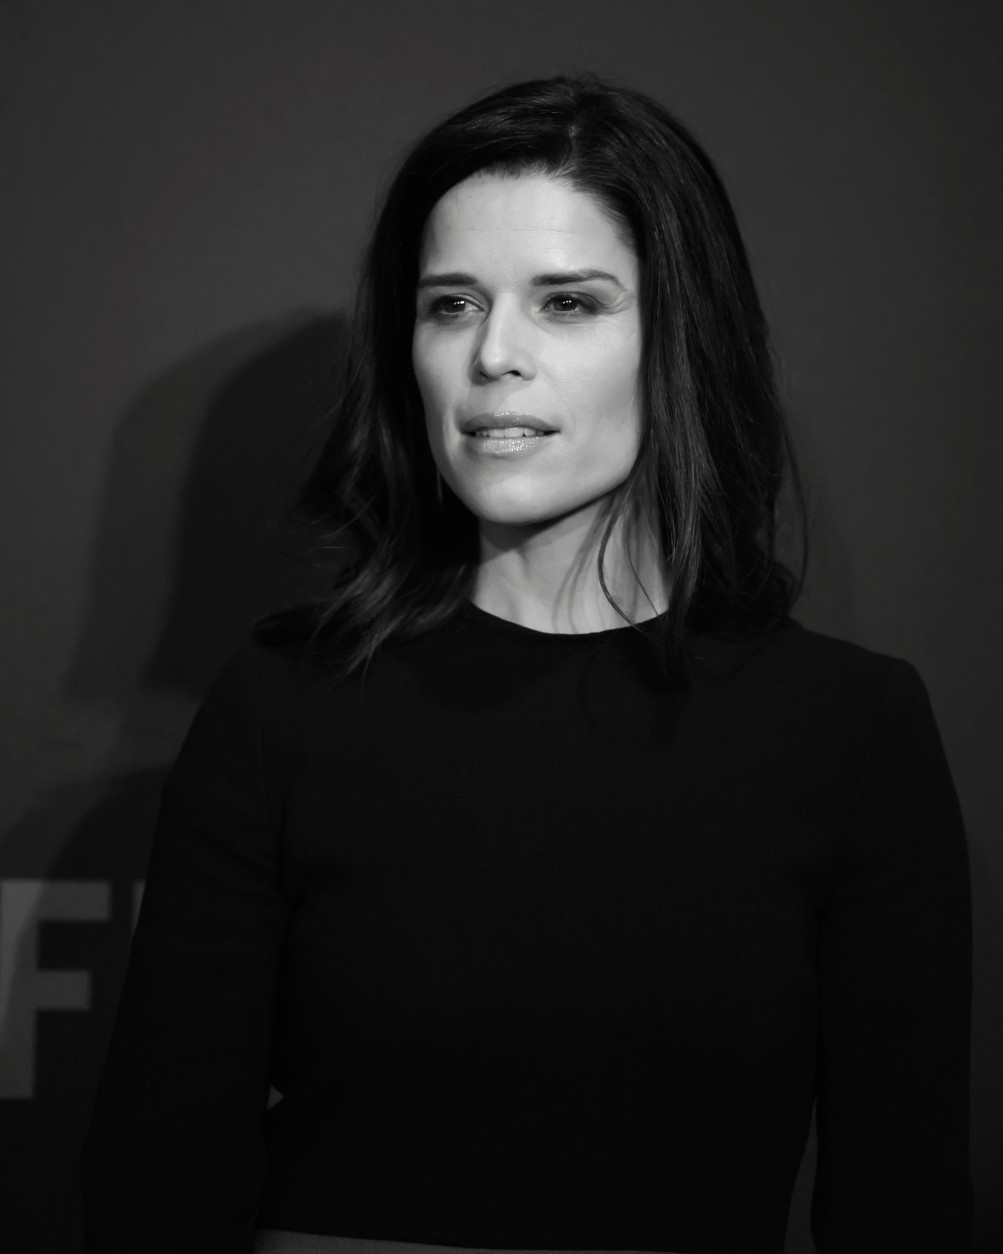  Neve Campbell on the red carpet at the National Portrait Gallery in D.C. on Feb. 22, 2016.  (Courtesy Shannon Finney, www.shannonfinneyphotography.com)